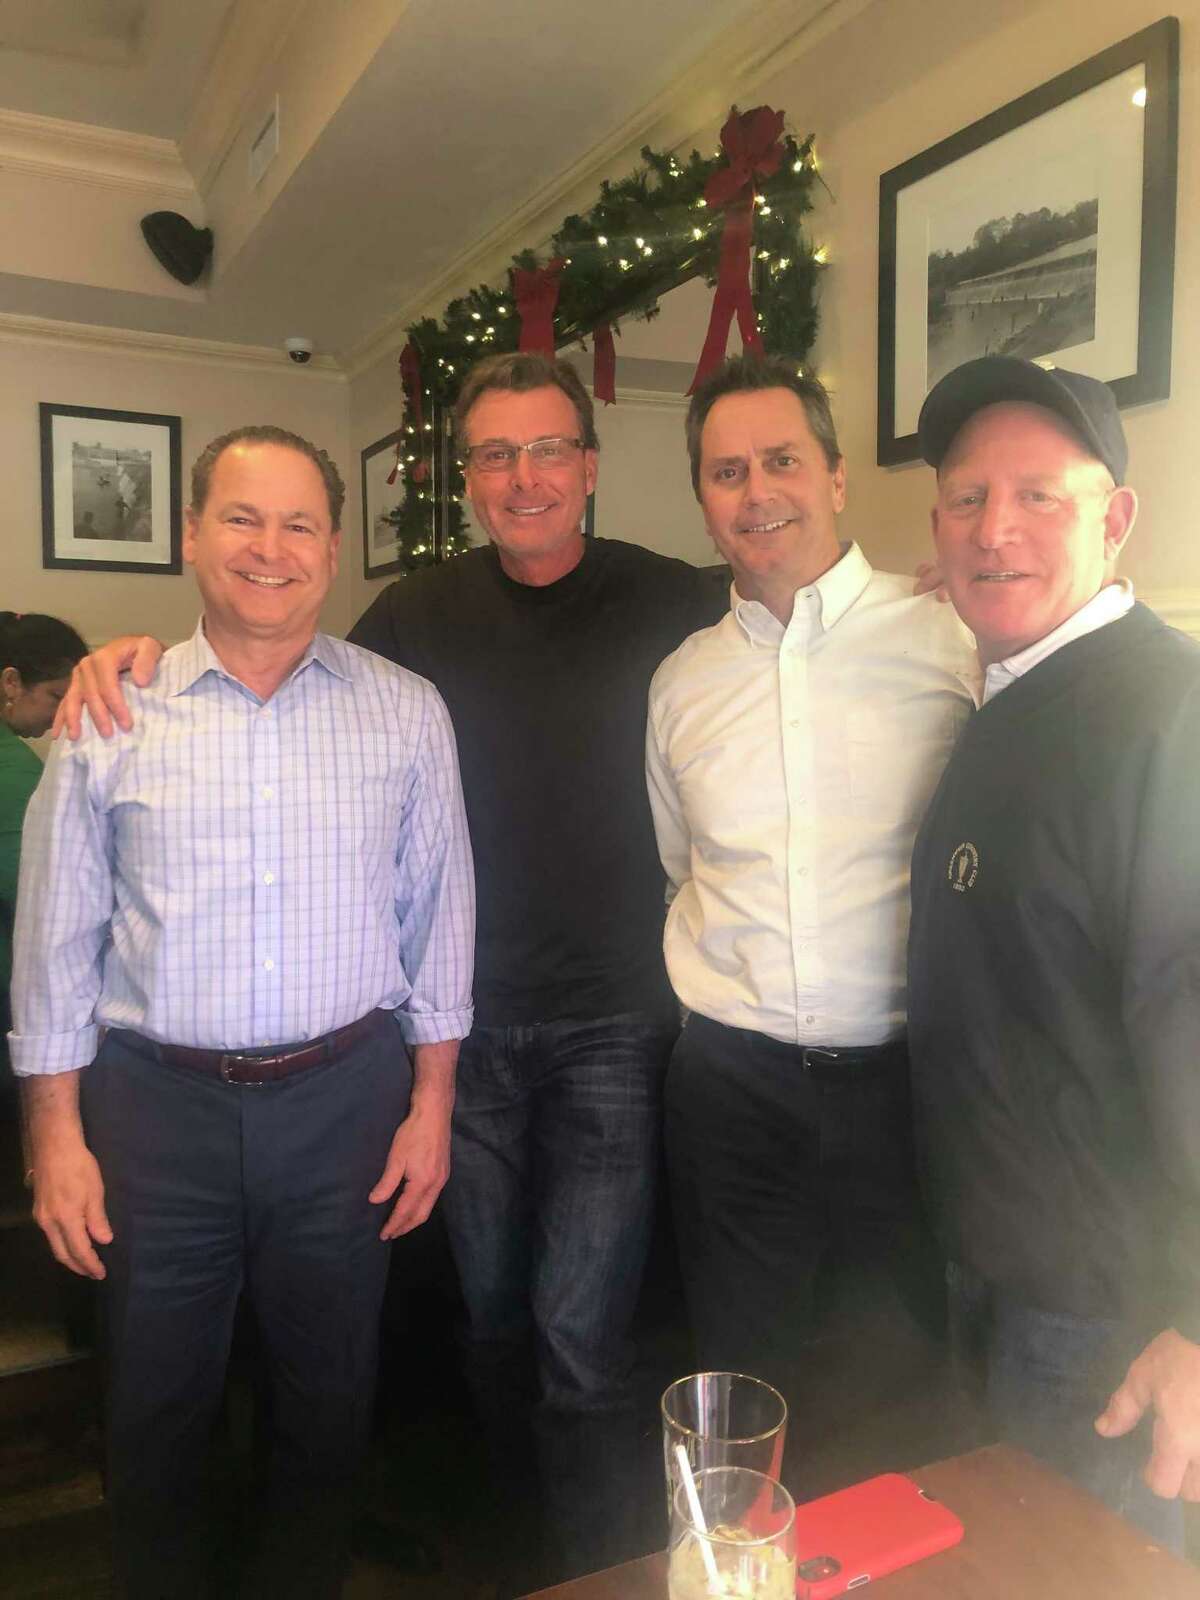 Former New York Mets champion Tim Teufel (second from left) with his friends Steve Gordon (left), Jim Kavanagh and Casey O'Brien at Caren's Cos Cobber in Greenwich last week.